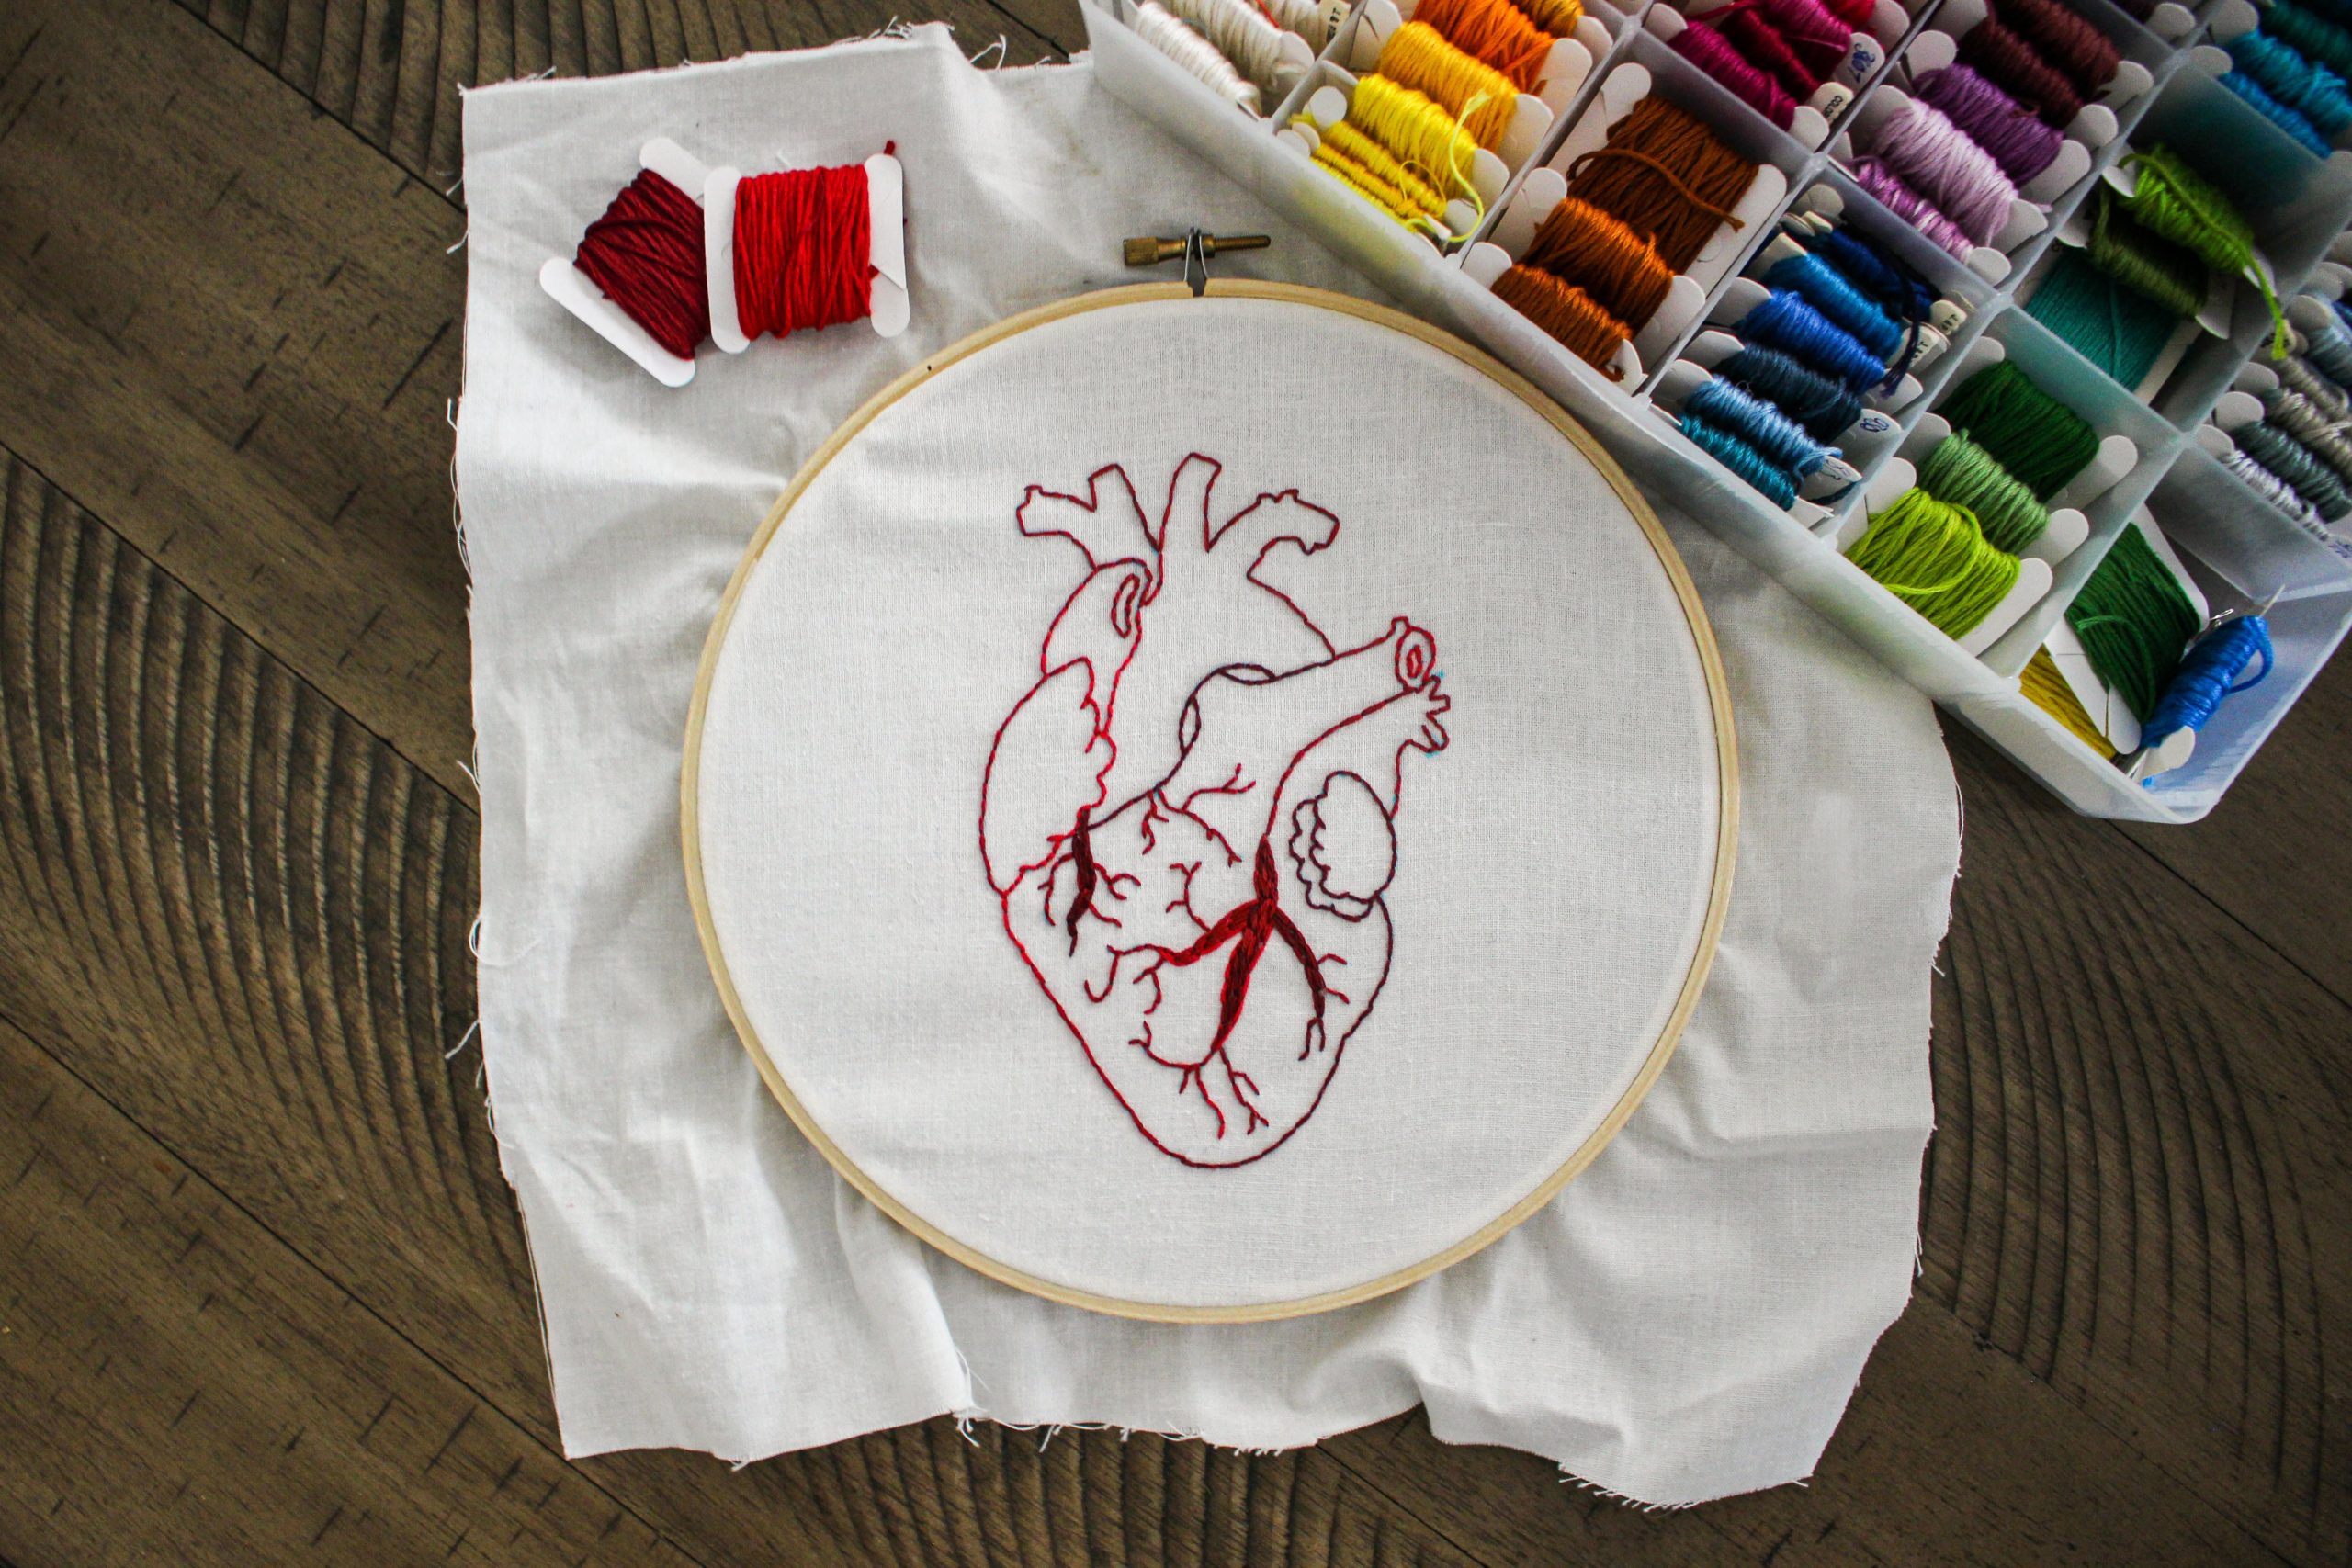 a heart sewn from red and burgundy thread, with a box of multicoloured threads beside it